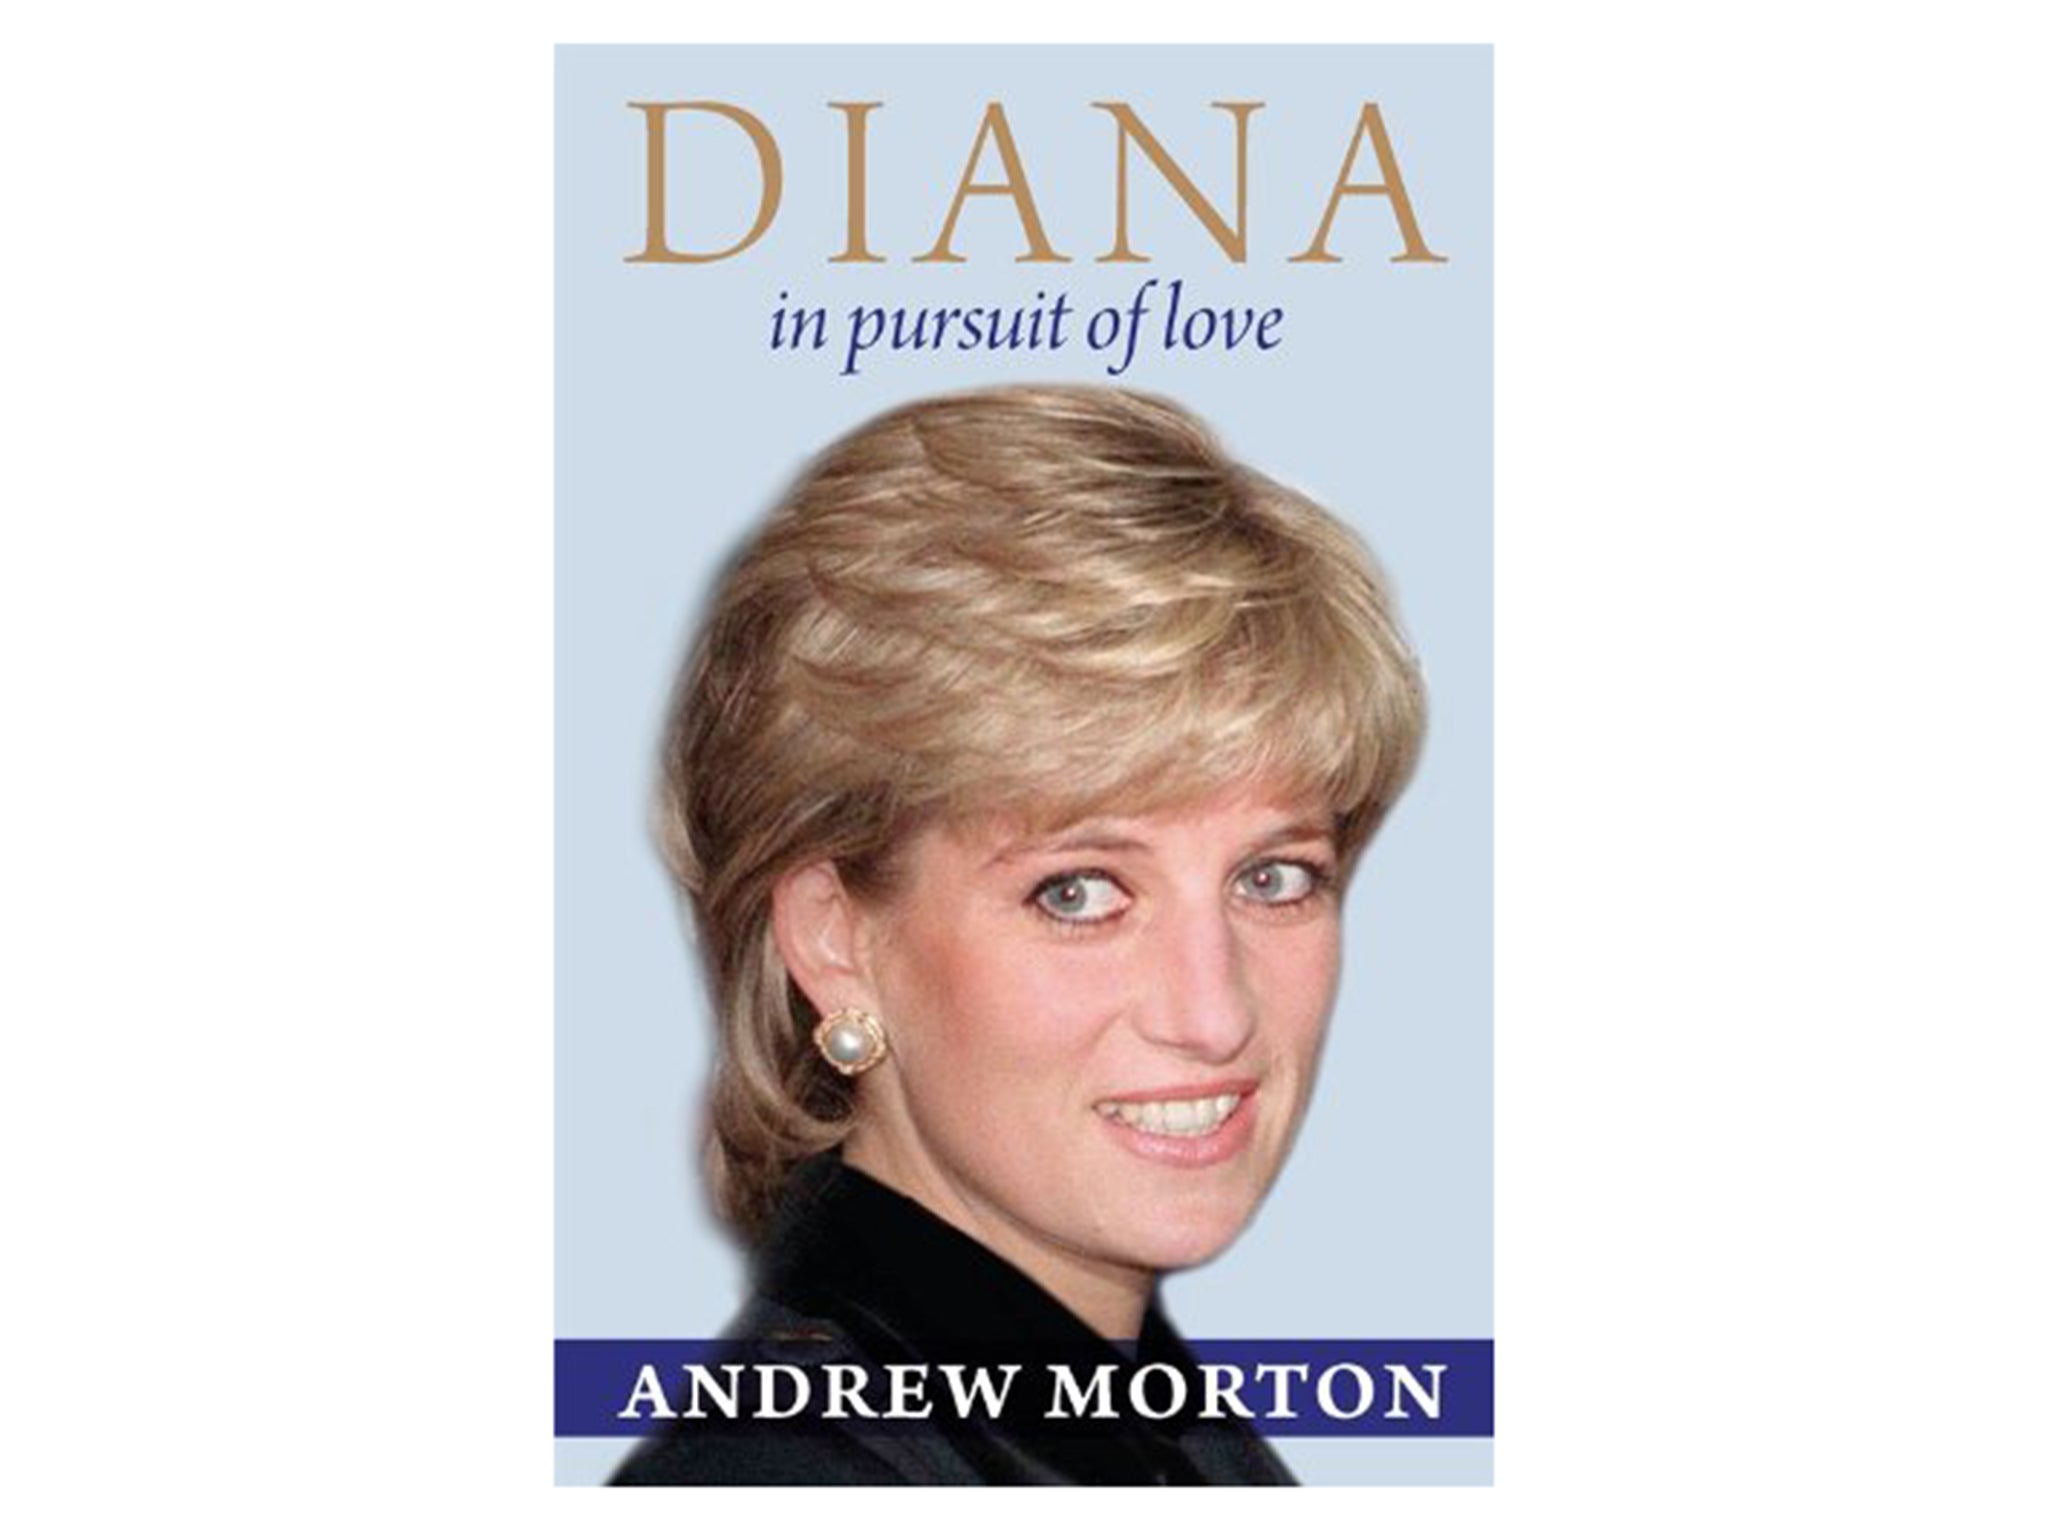 diana-in-pursuit-of-love-indybest.jpg